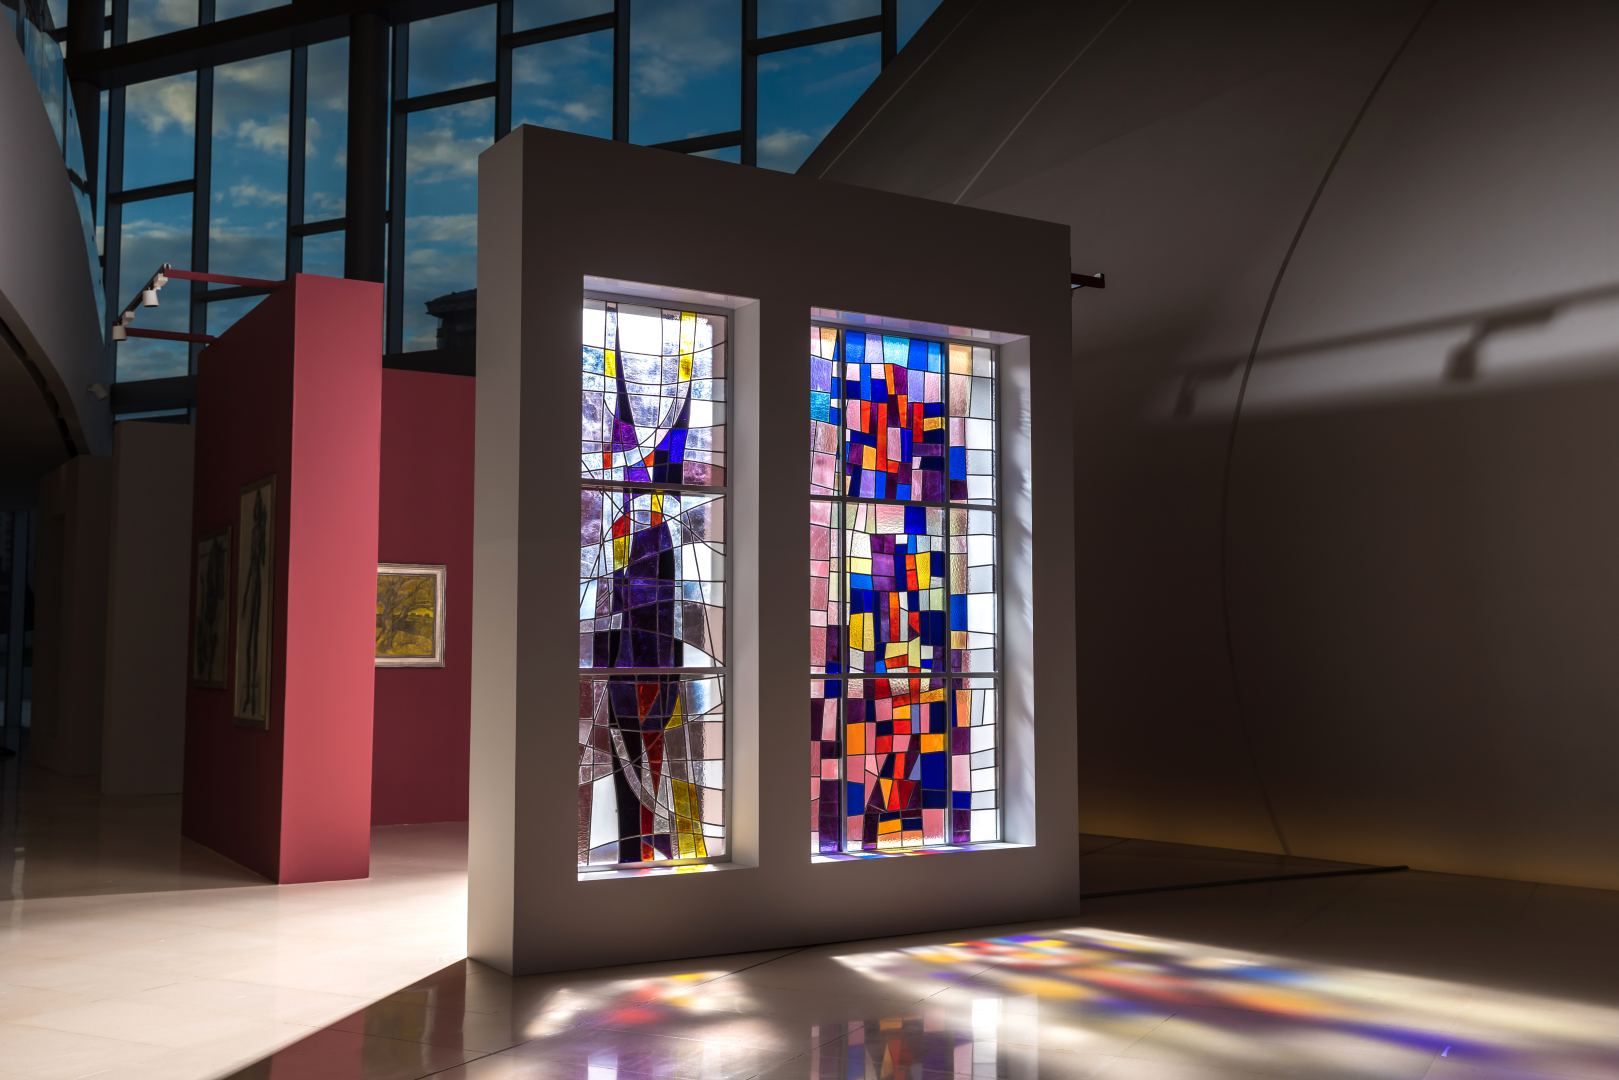 Stained-glass art through eyes of artist [PHOTO/VIDEO] - Gallery Image